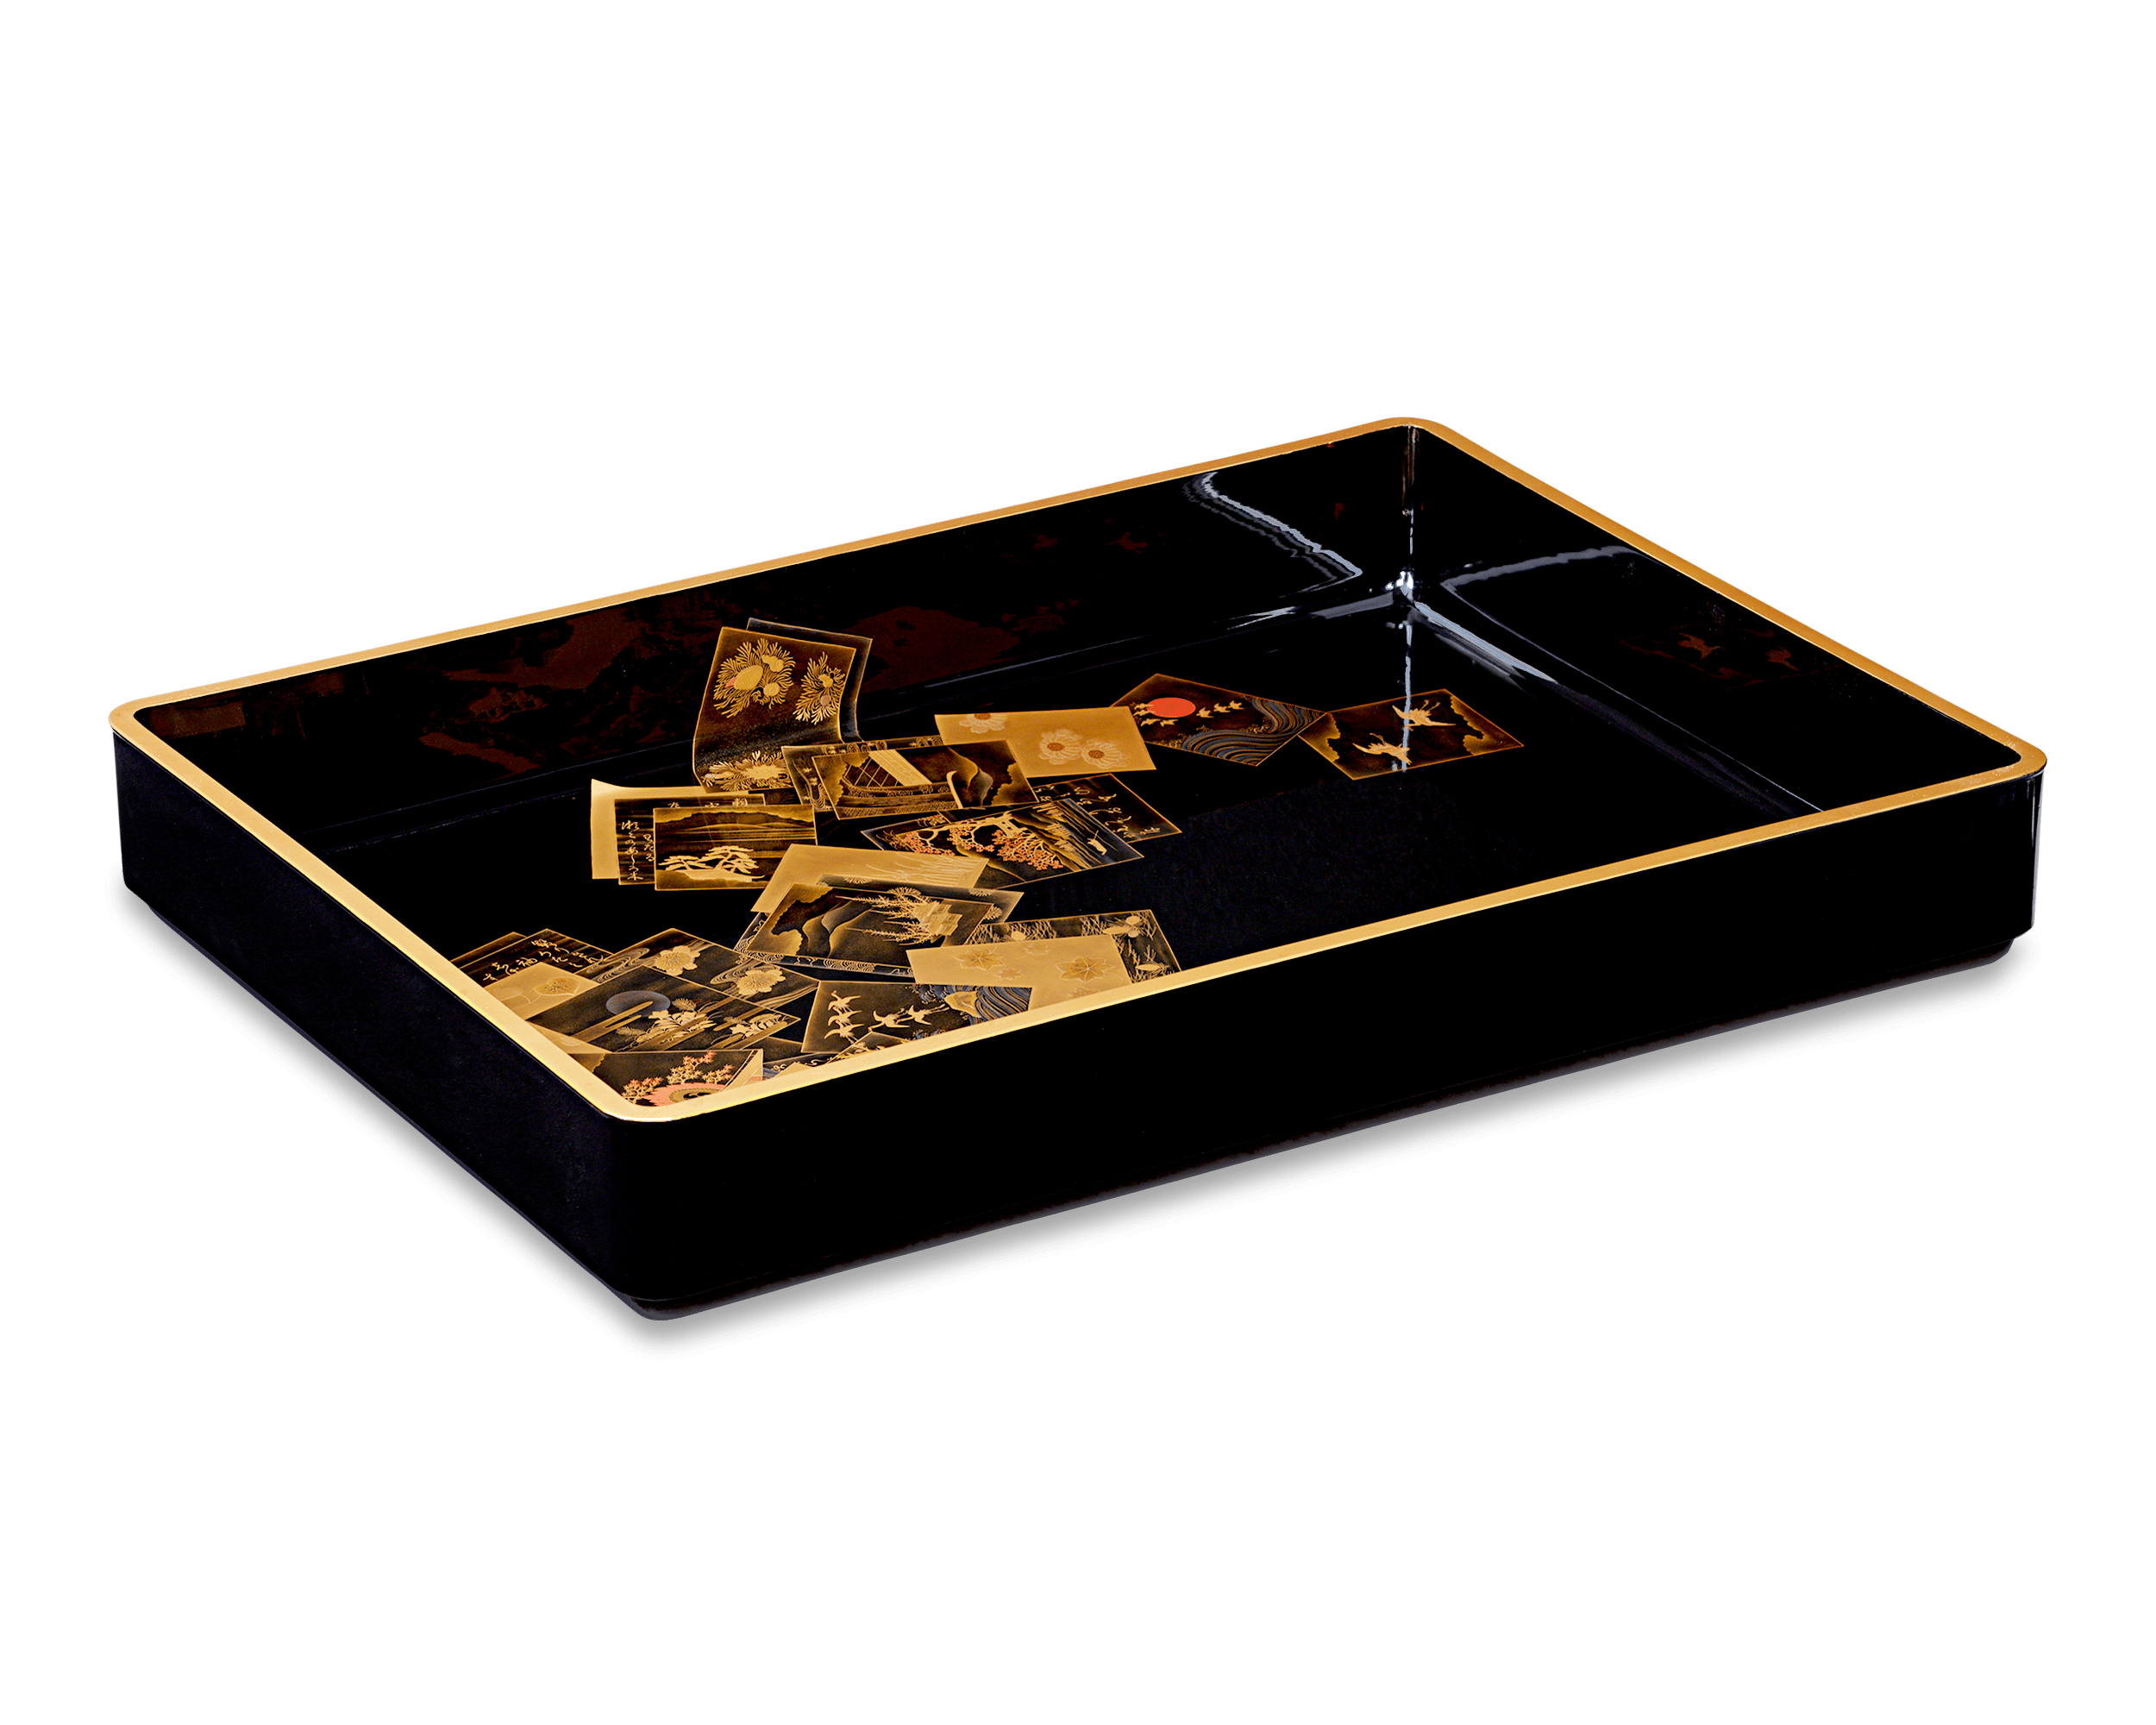 Japanese Lacquer Tray with Cards